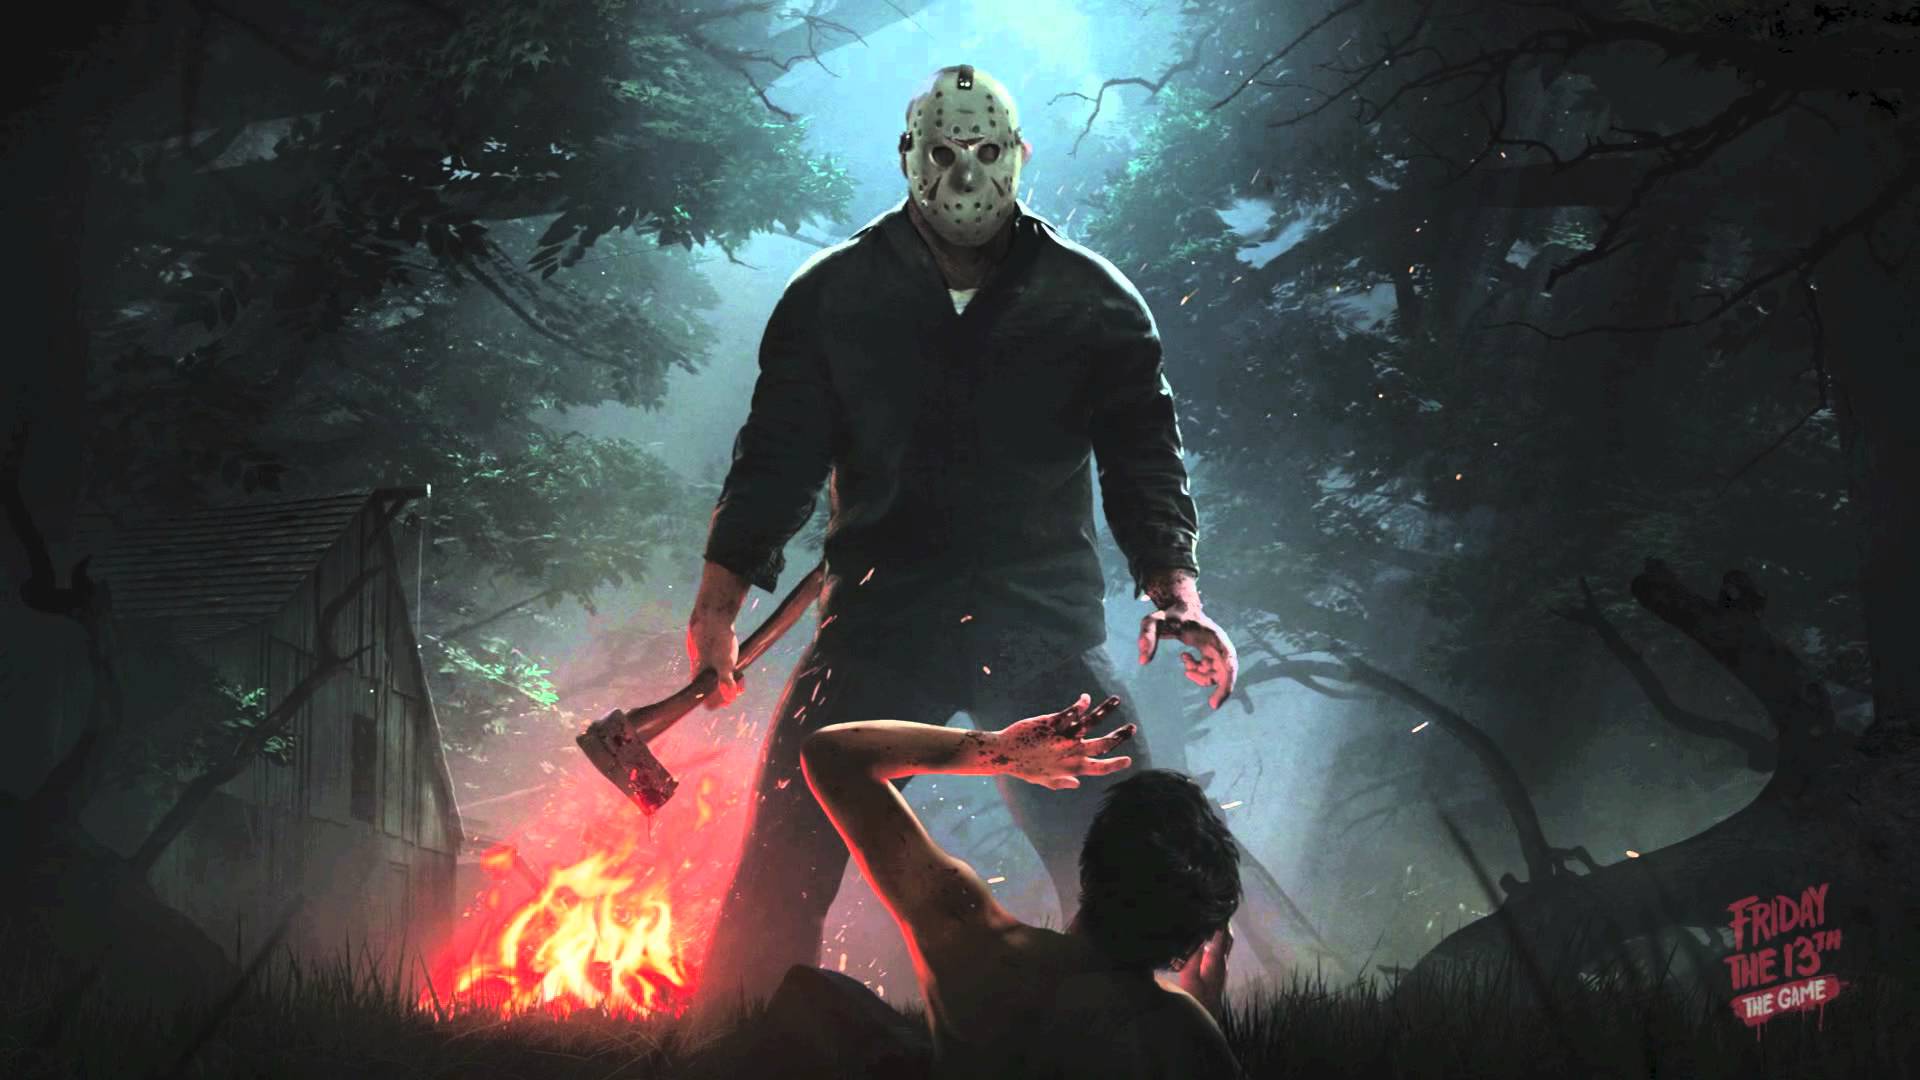 Remember To Breathe: Be The Counselor In New Friday the 13th